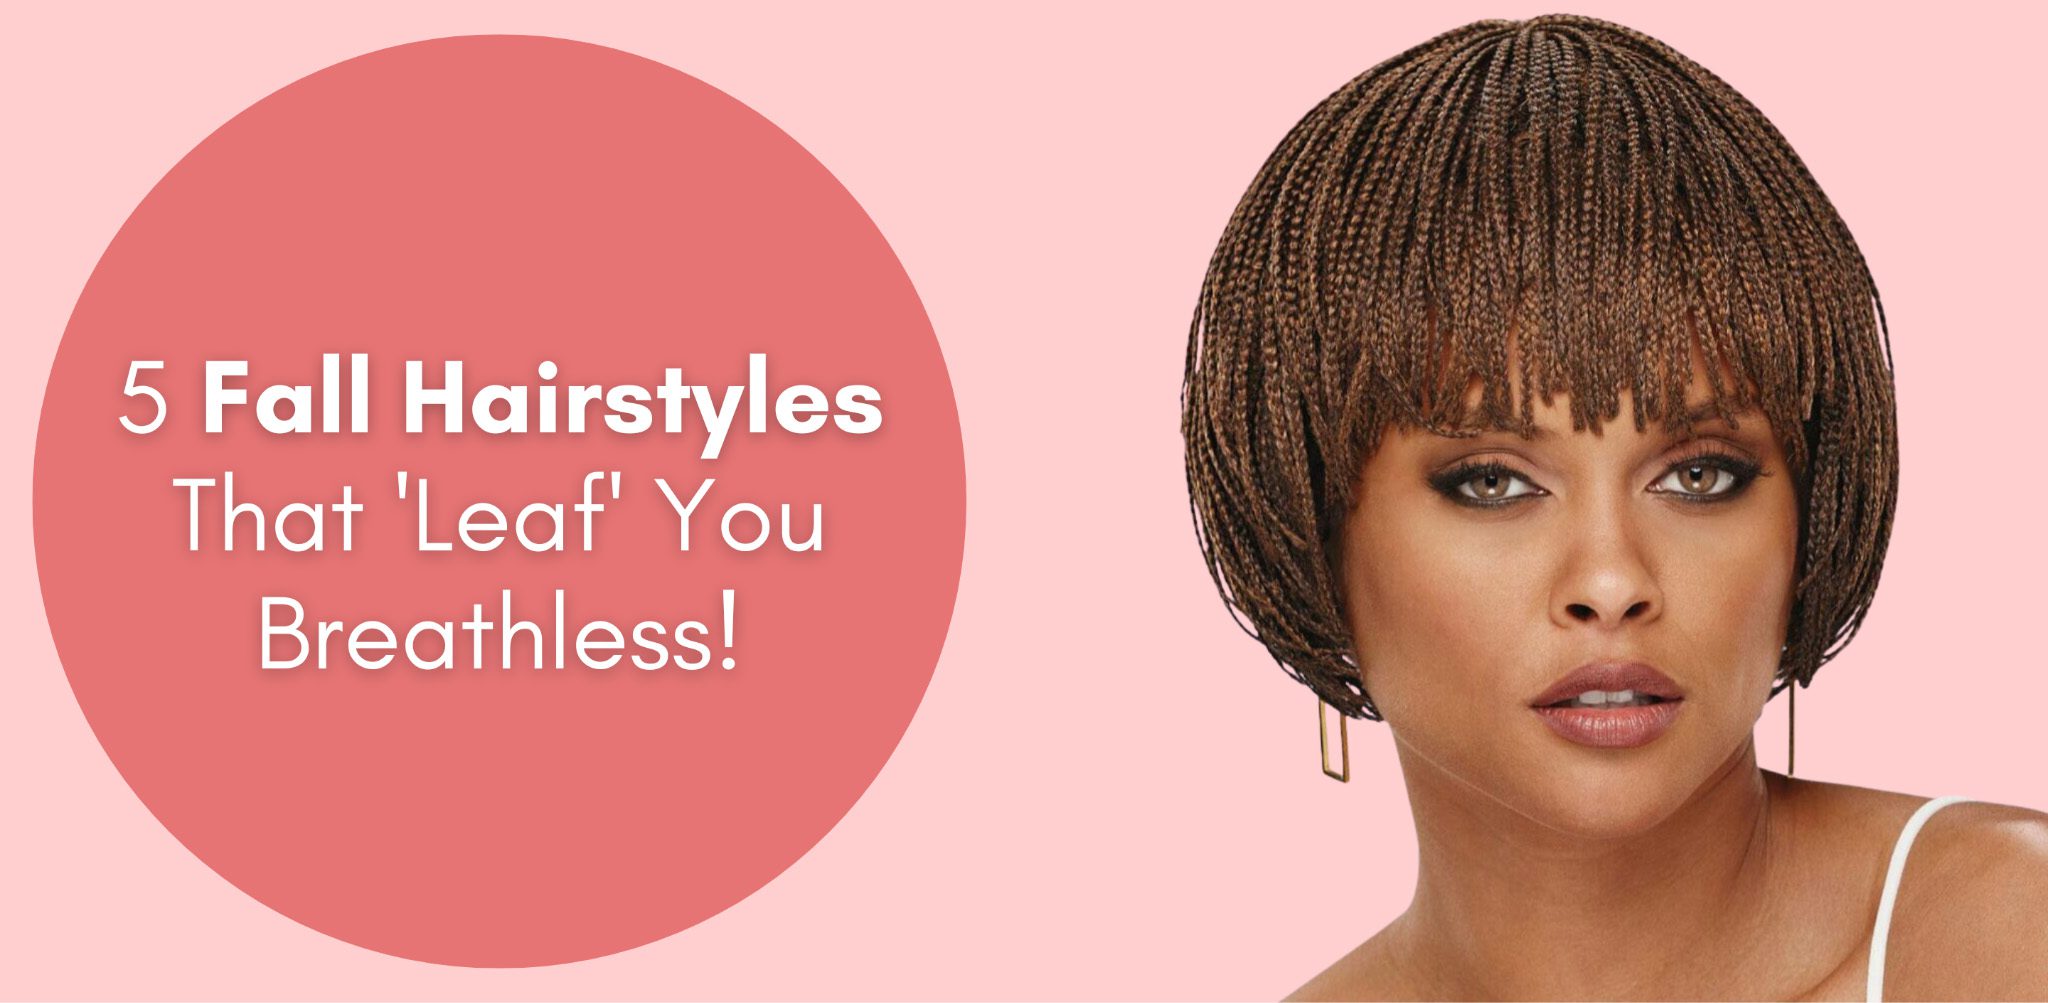 5 fall hairstyles that leaf you breathless